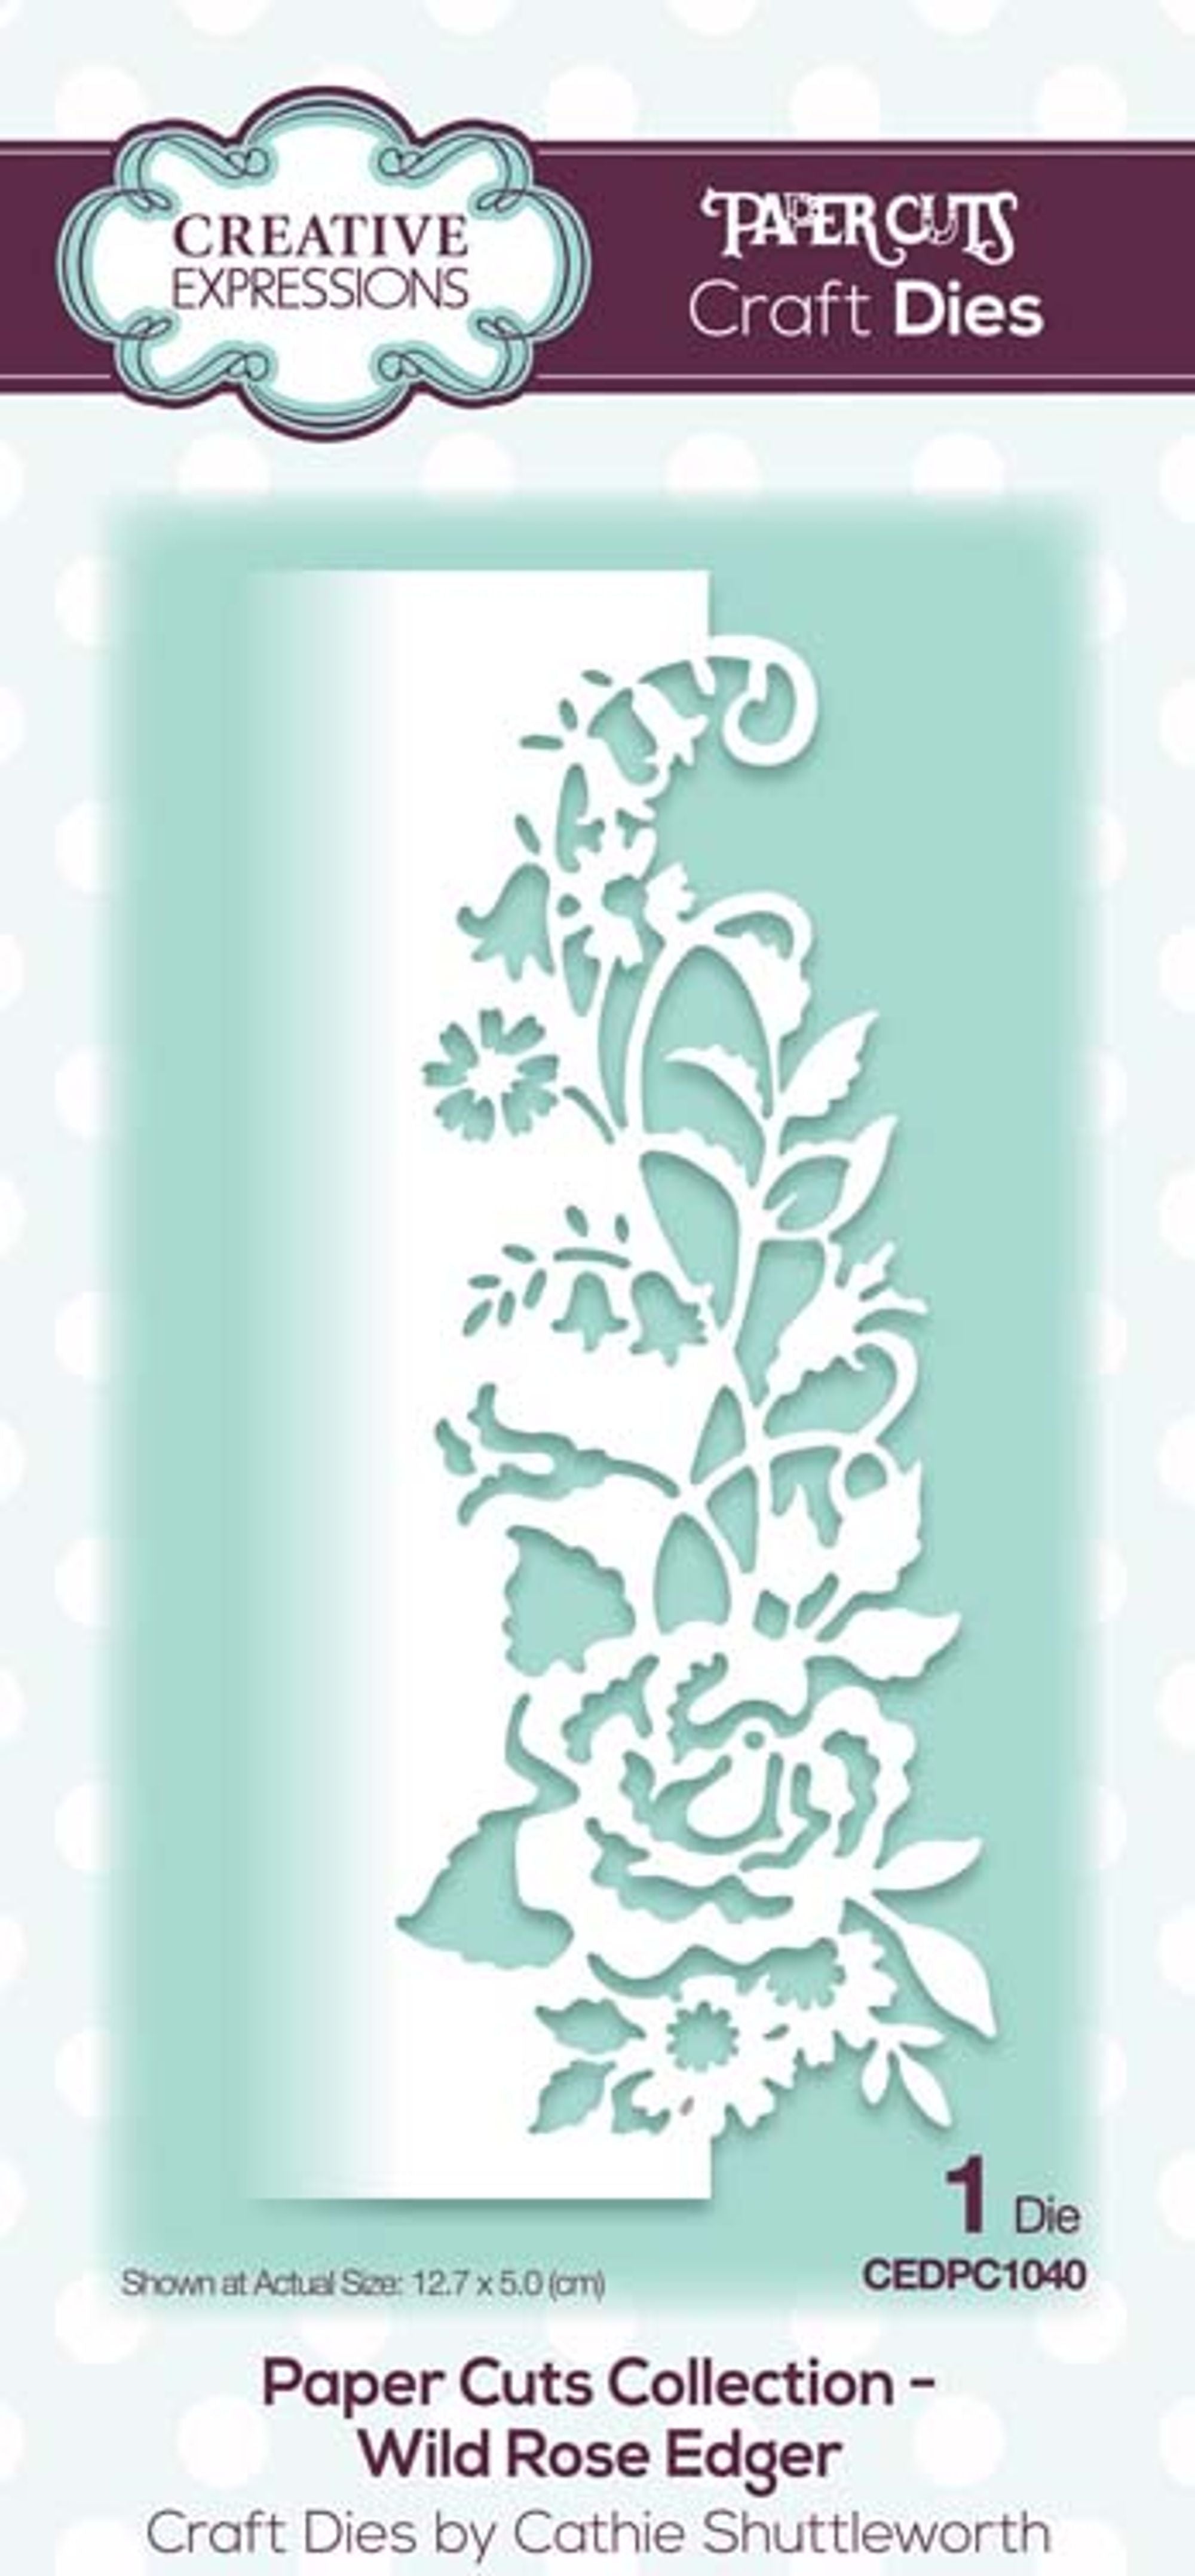 Paper Cuts Collection Wild Rose Edger Craft Die